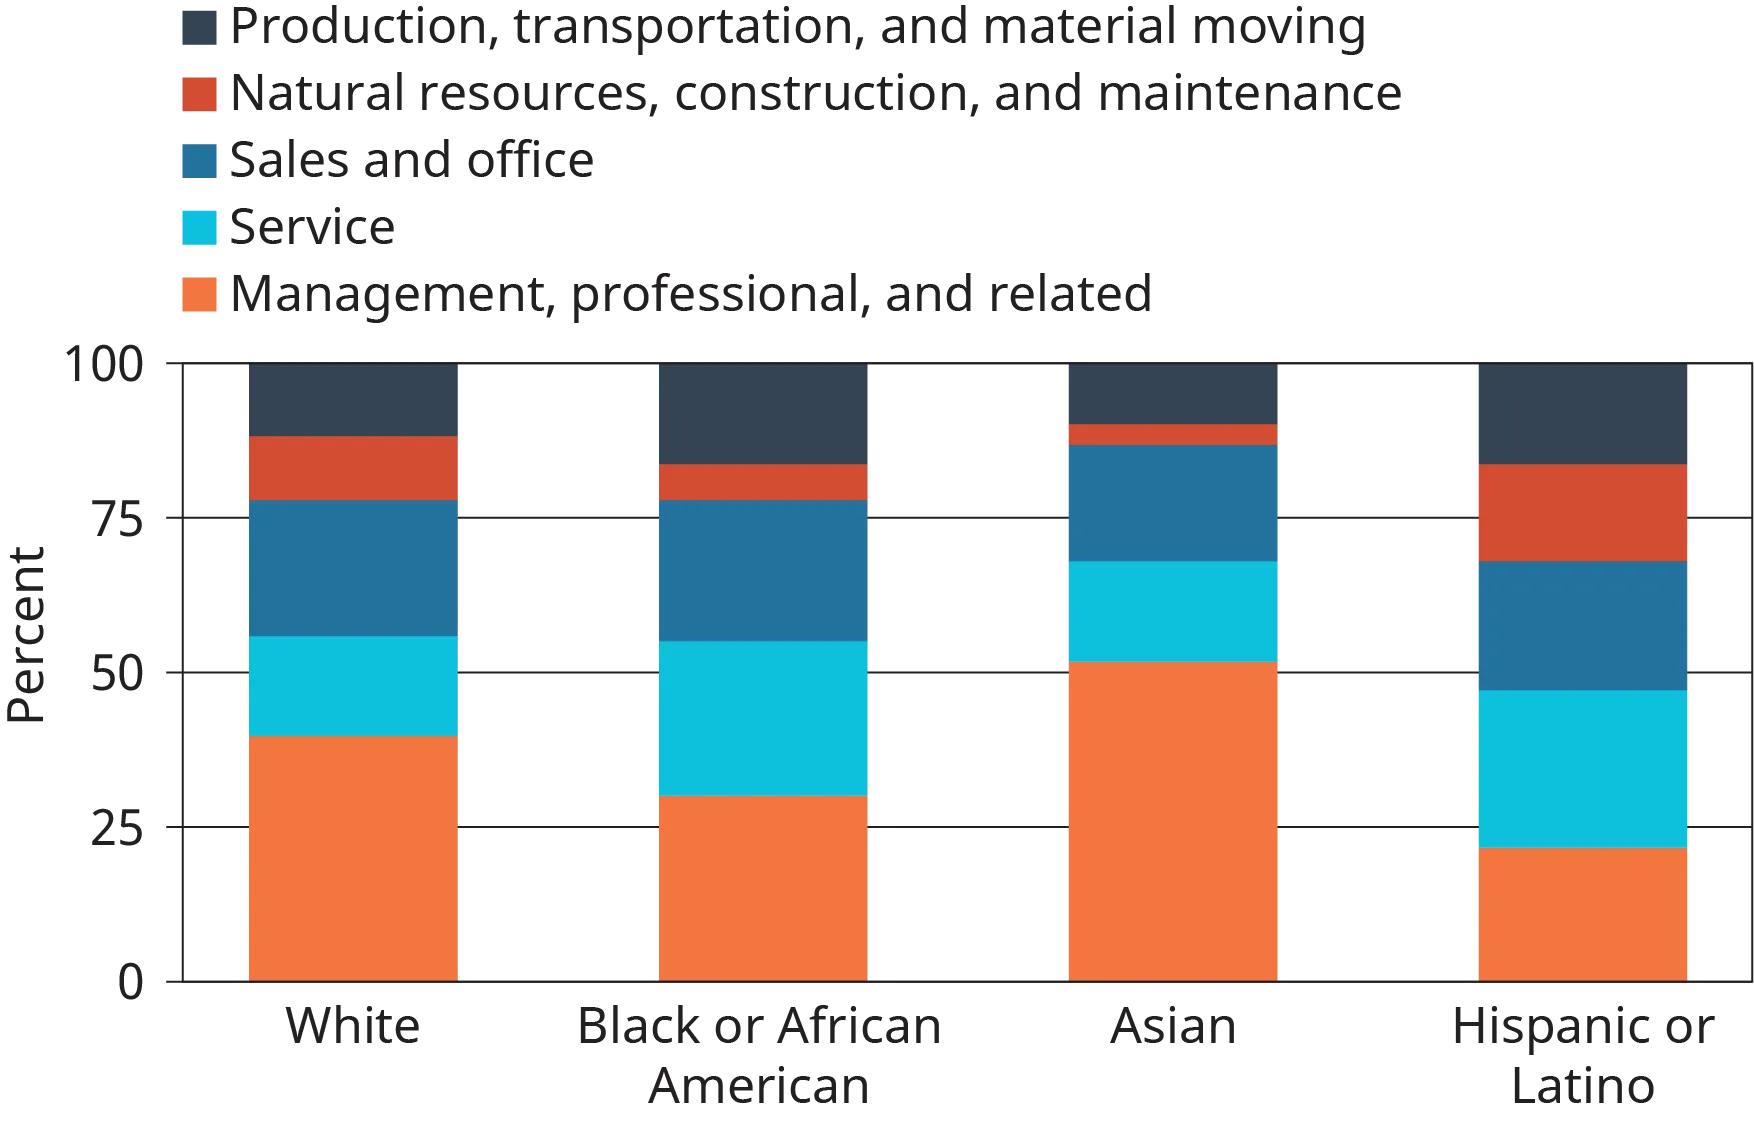 A stacked vertical bar graph plots the percentage of people employed in different sectors belonging to different ethnic groups.